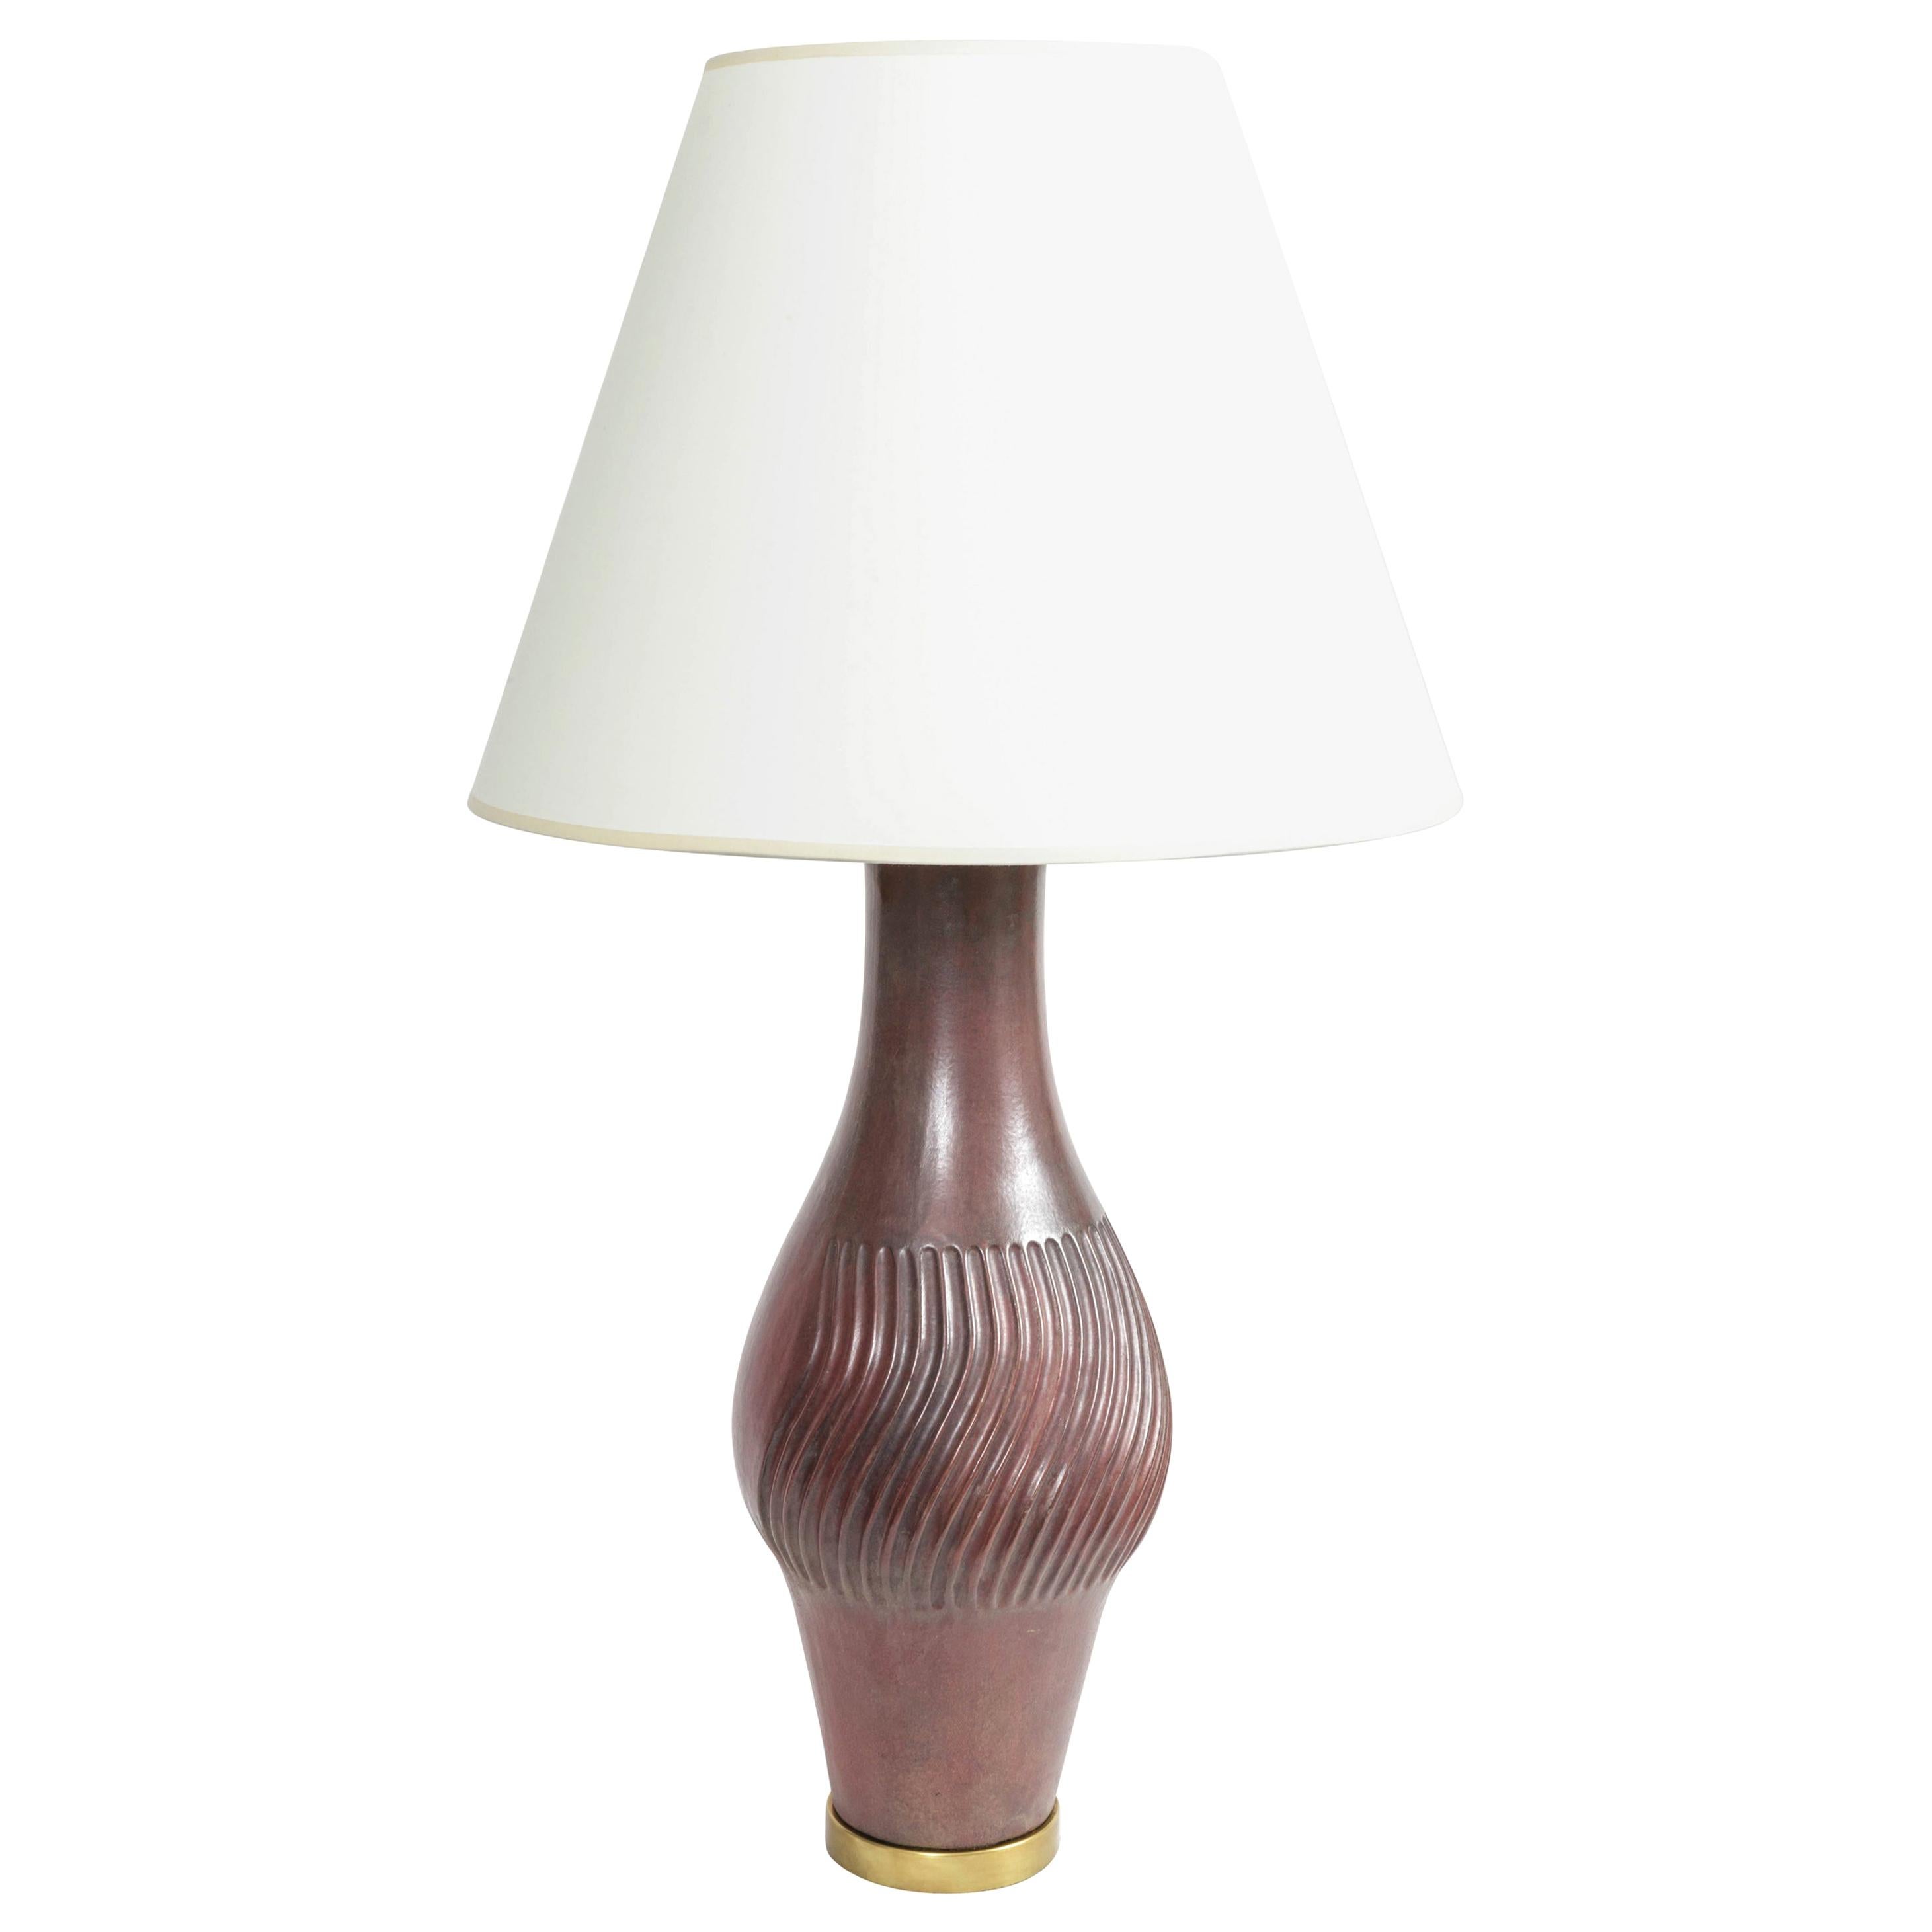 Deep Red Ceramic and Brass Table Lamp by Marcello Fantoni, Italy, circa 1958